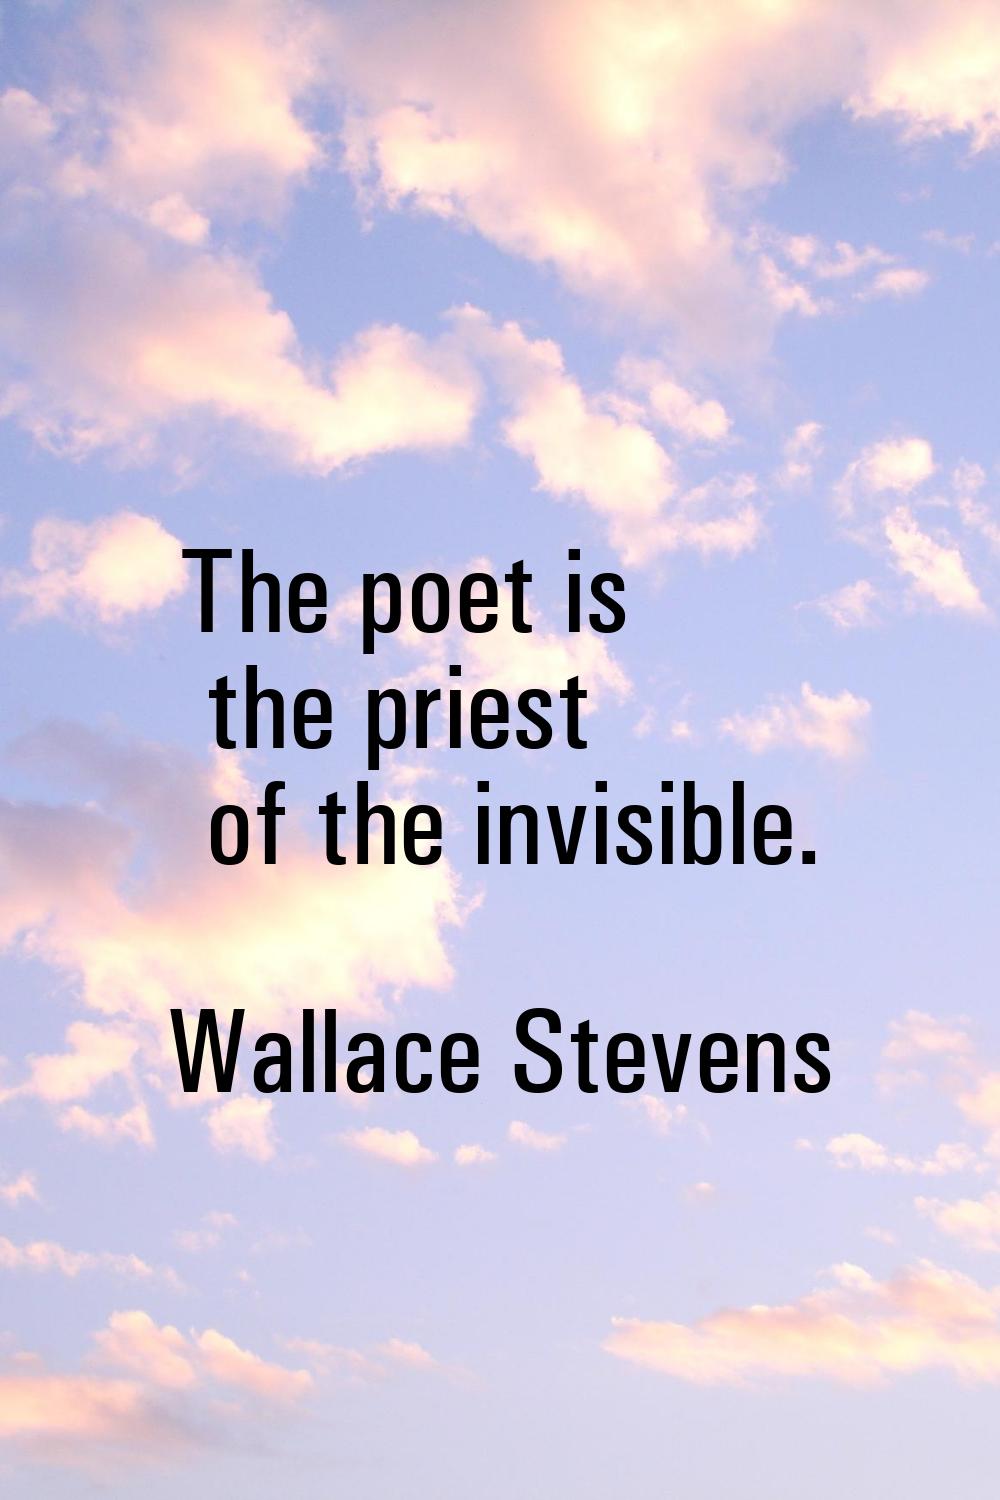 The poet is the priest of the invisible.